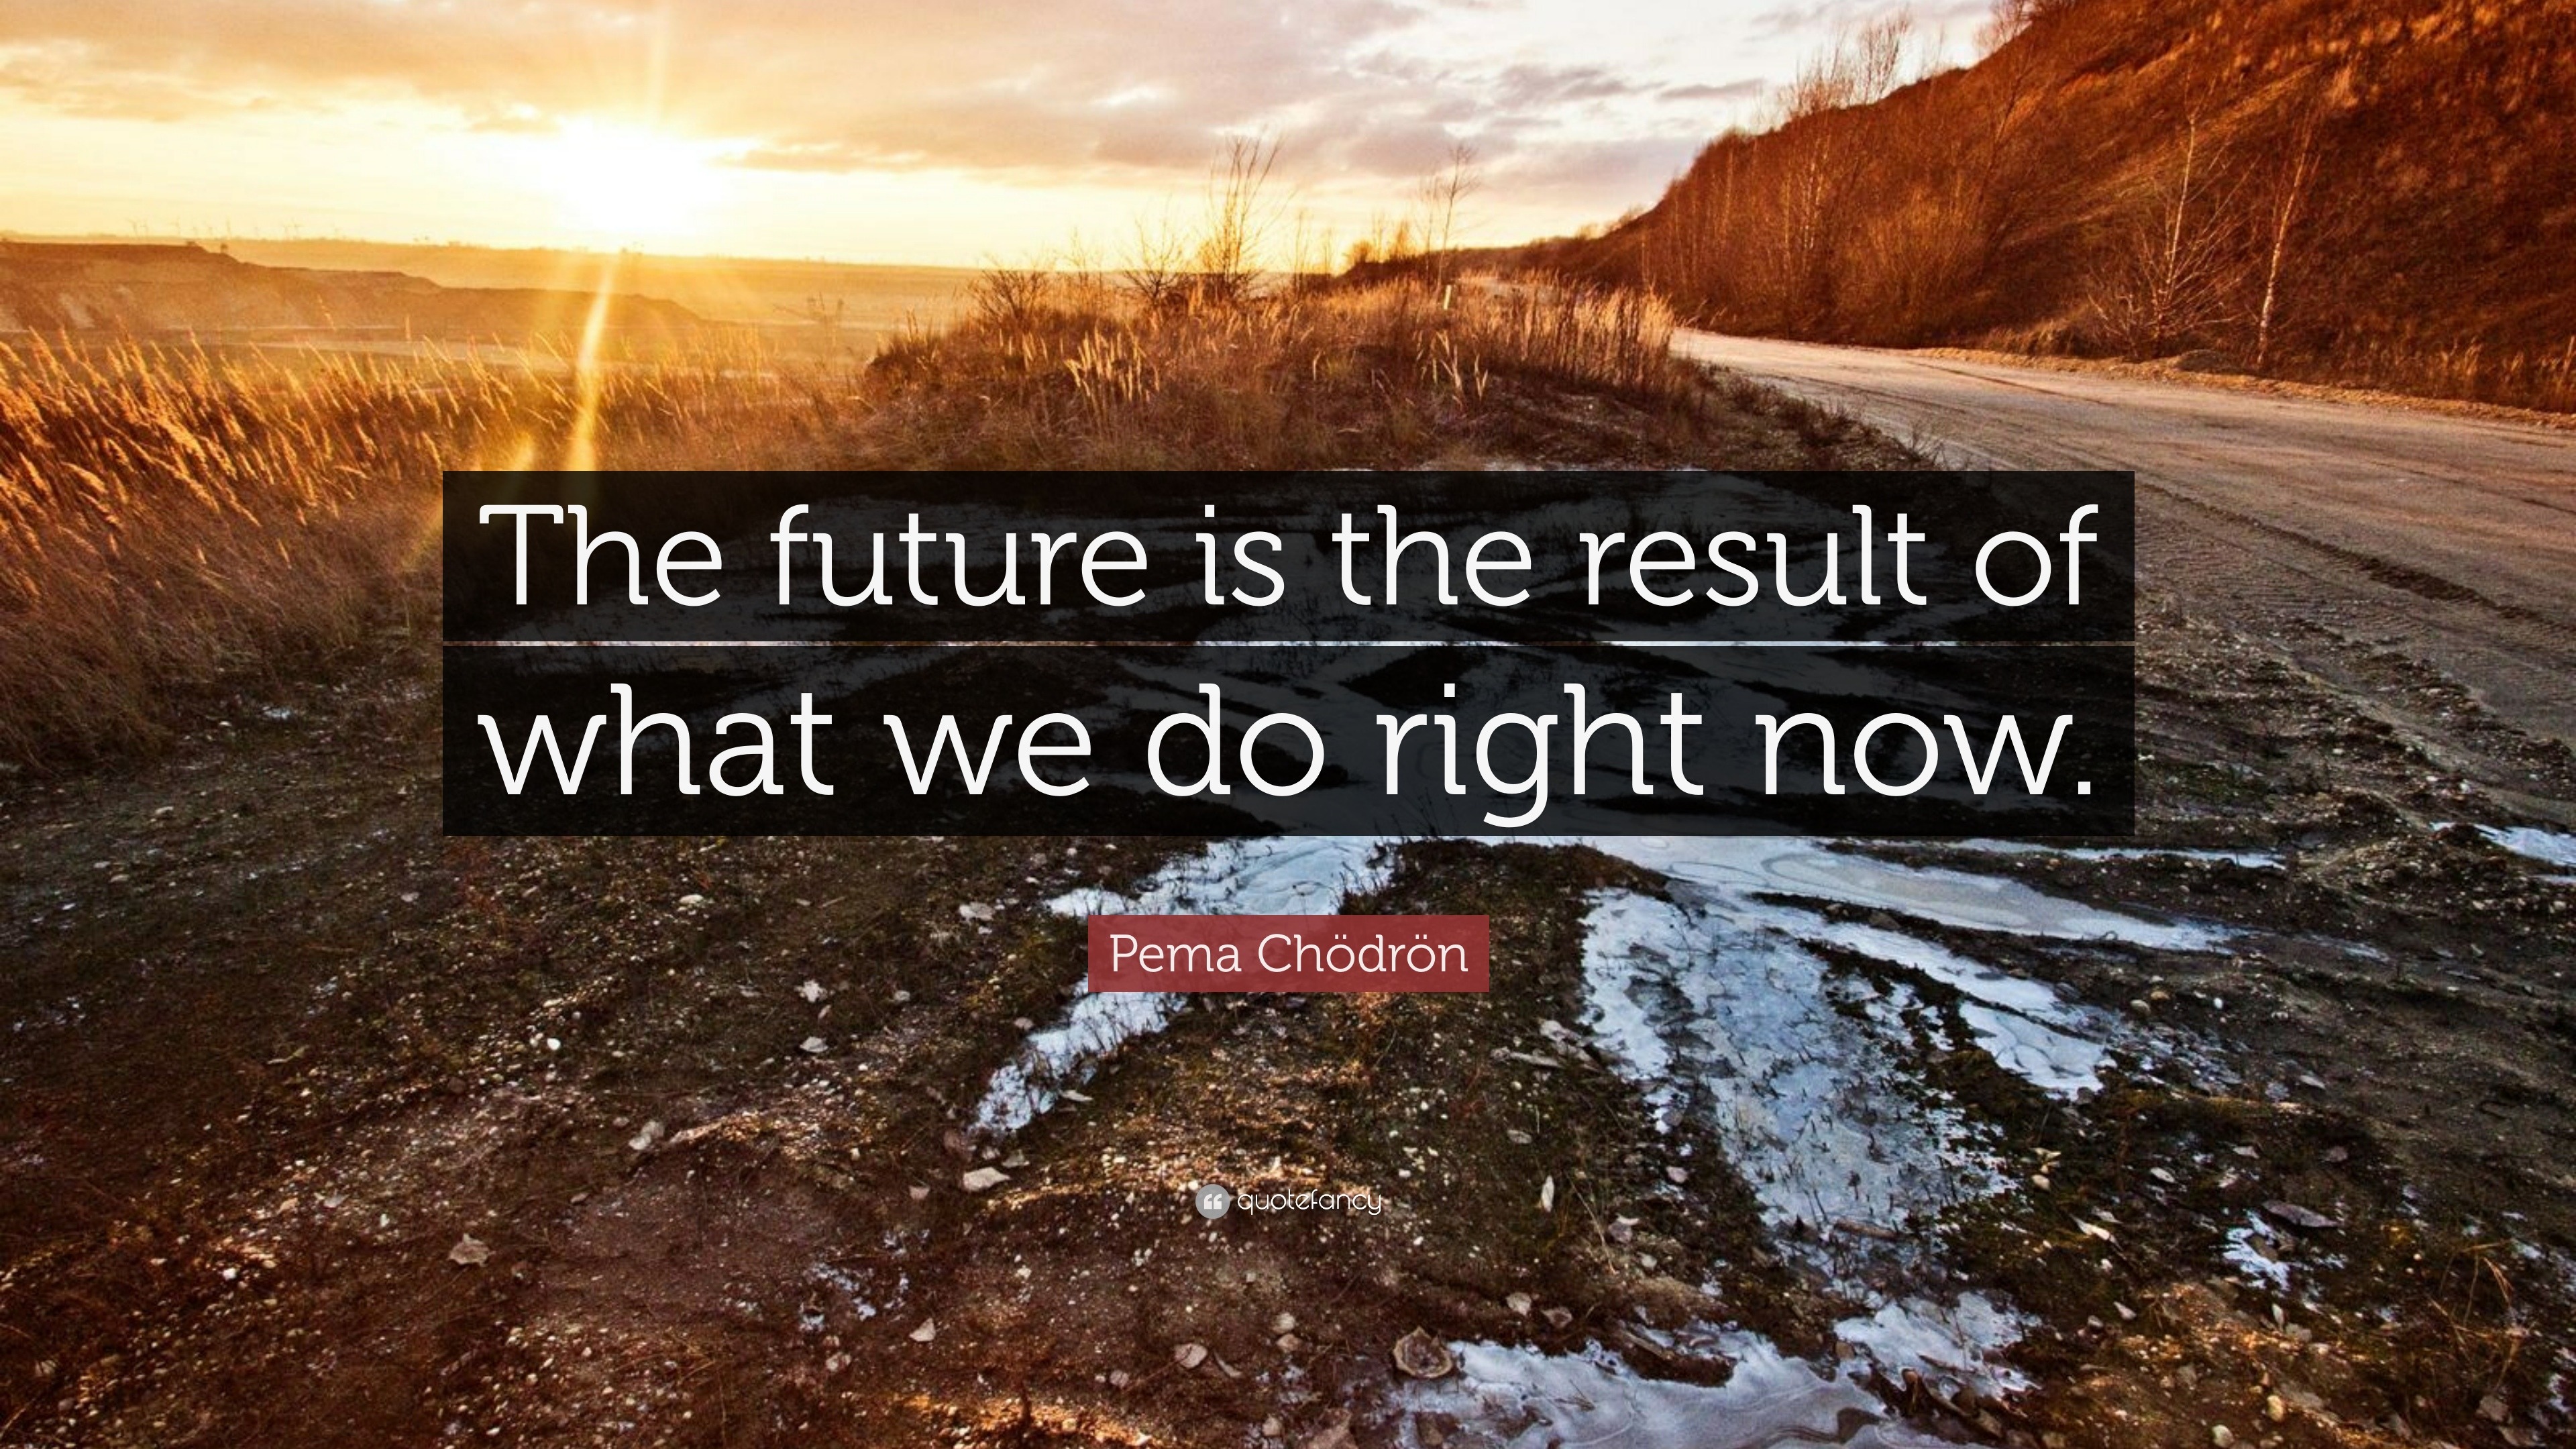 Pema Chödrön Quote: “The future is the result of what we do right now.”